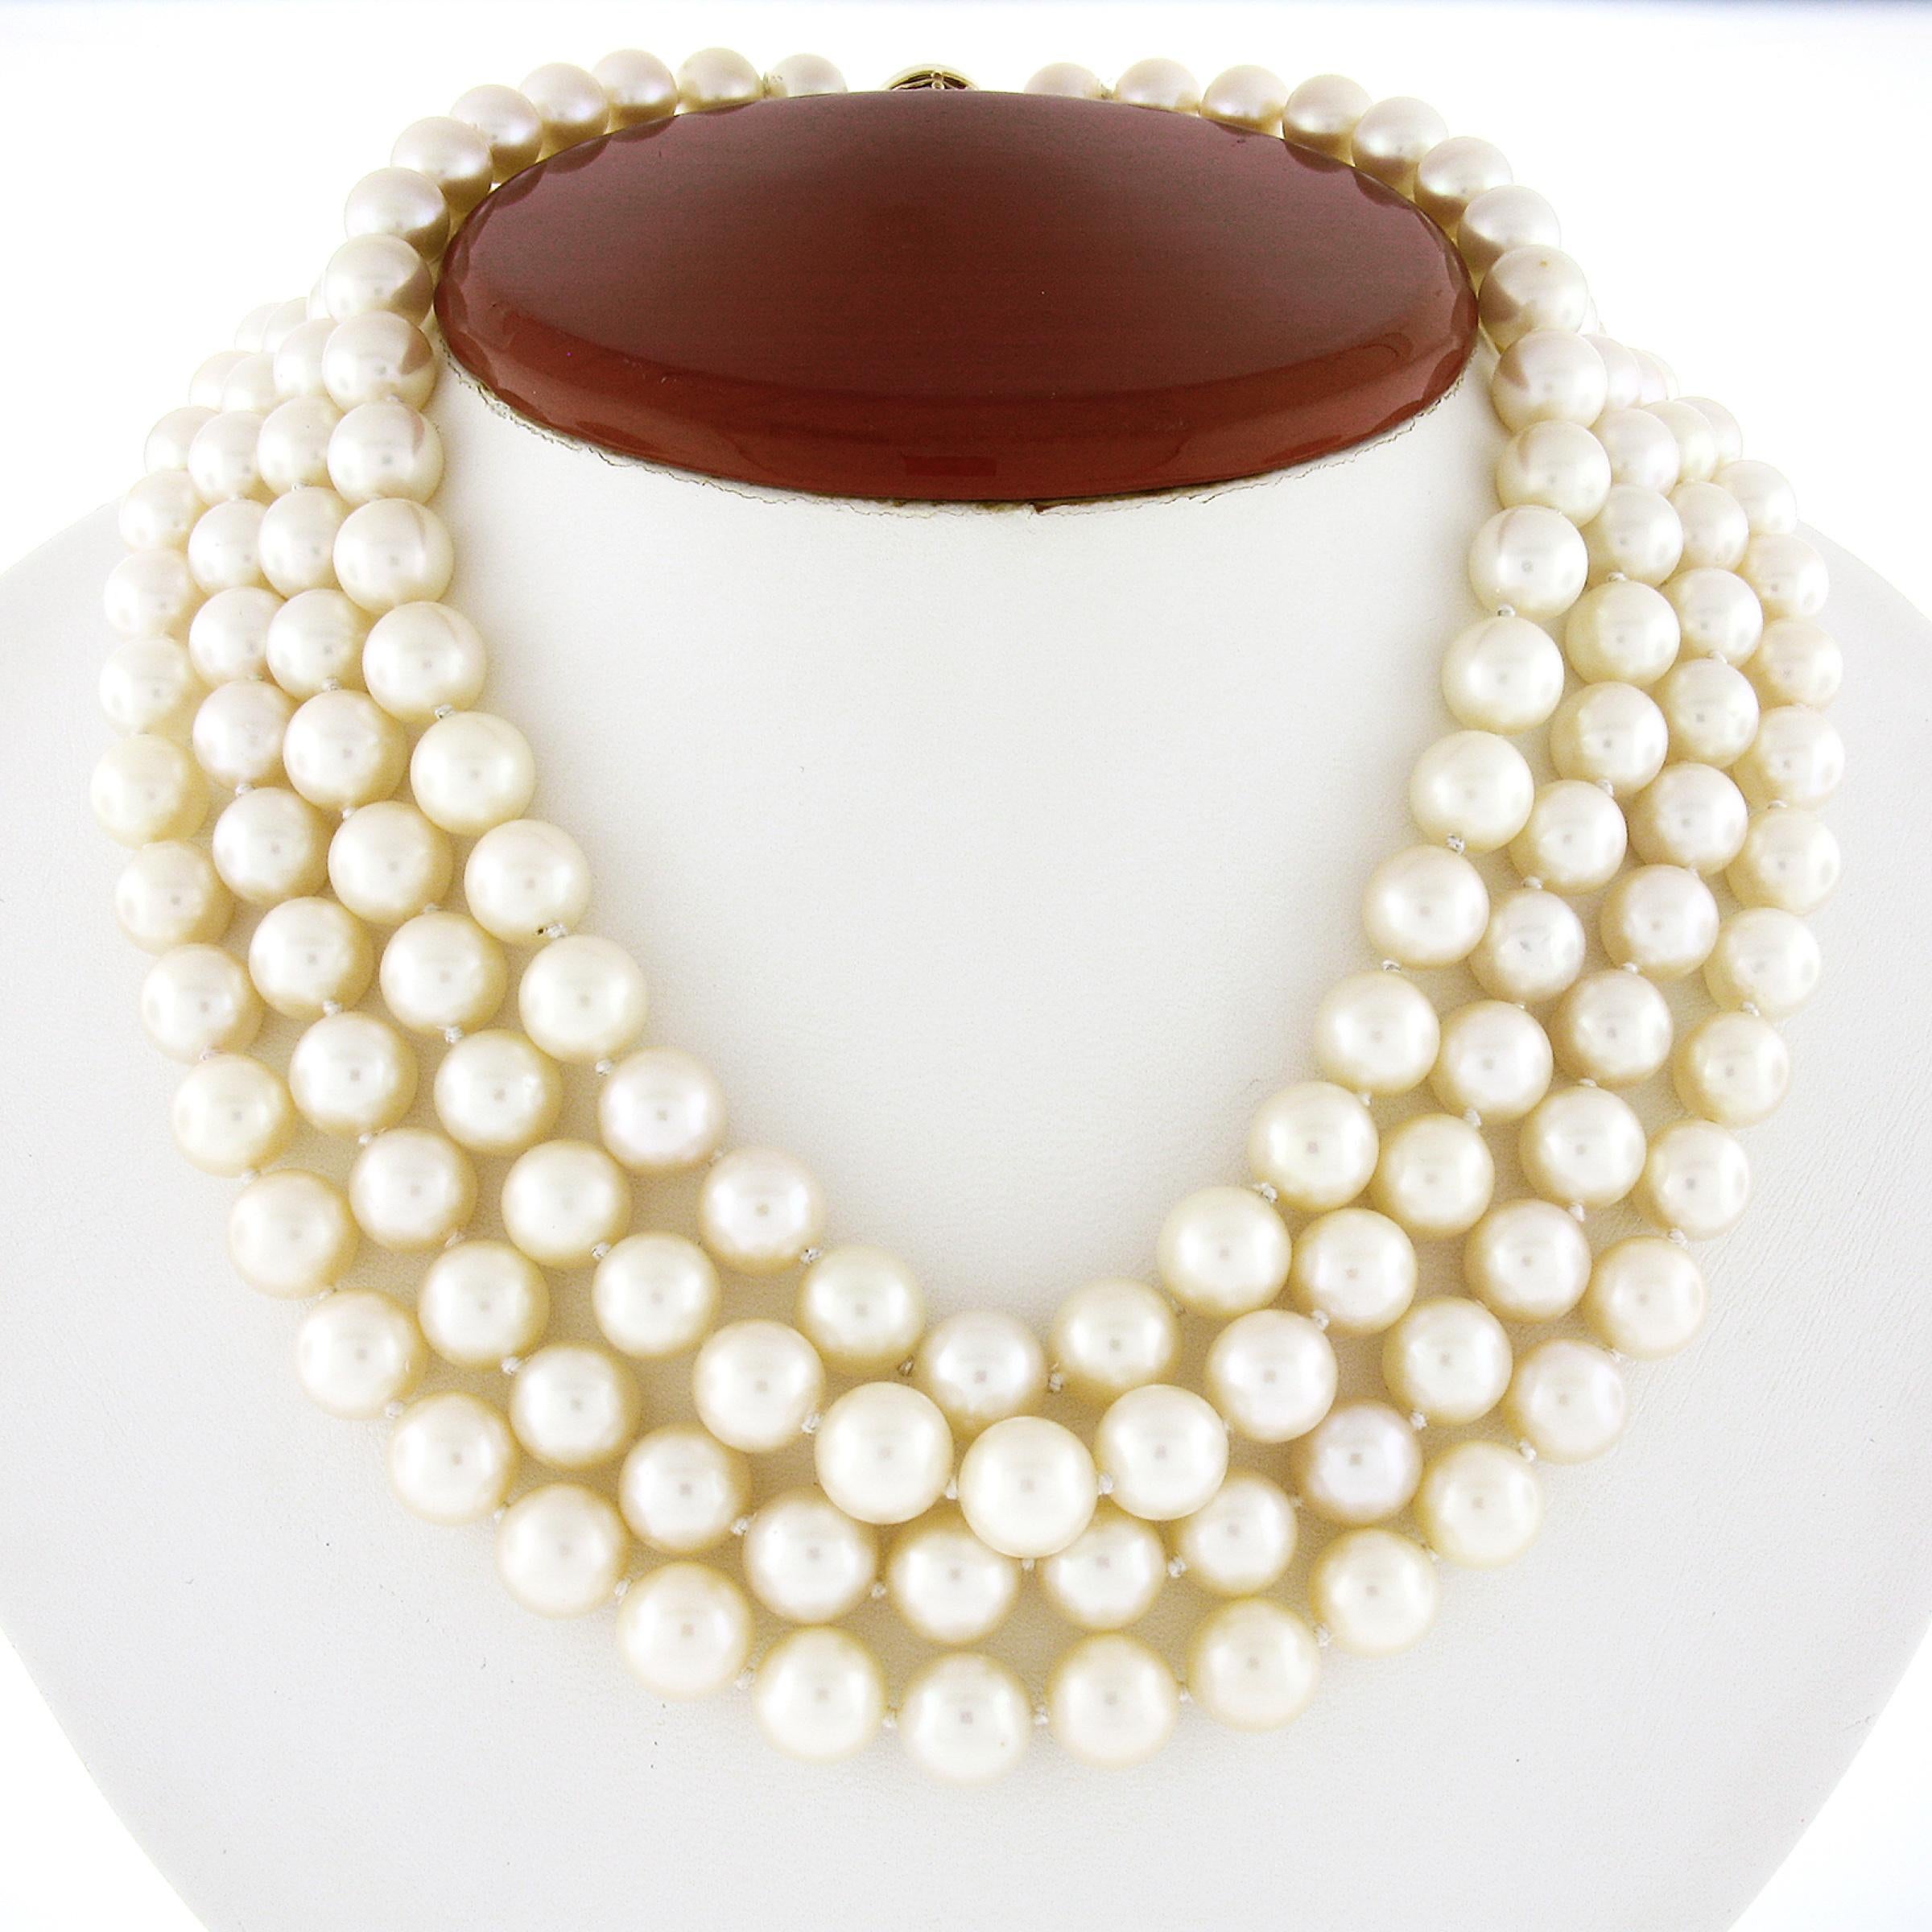 This magnificent vintage statement necklace was designed by Tambetti and features 4 strands of cultured pearls that are elegantly strung throughout. These beautiful pearls slightly graduate in size from 8.5-9.5mm with the largest at the center of